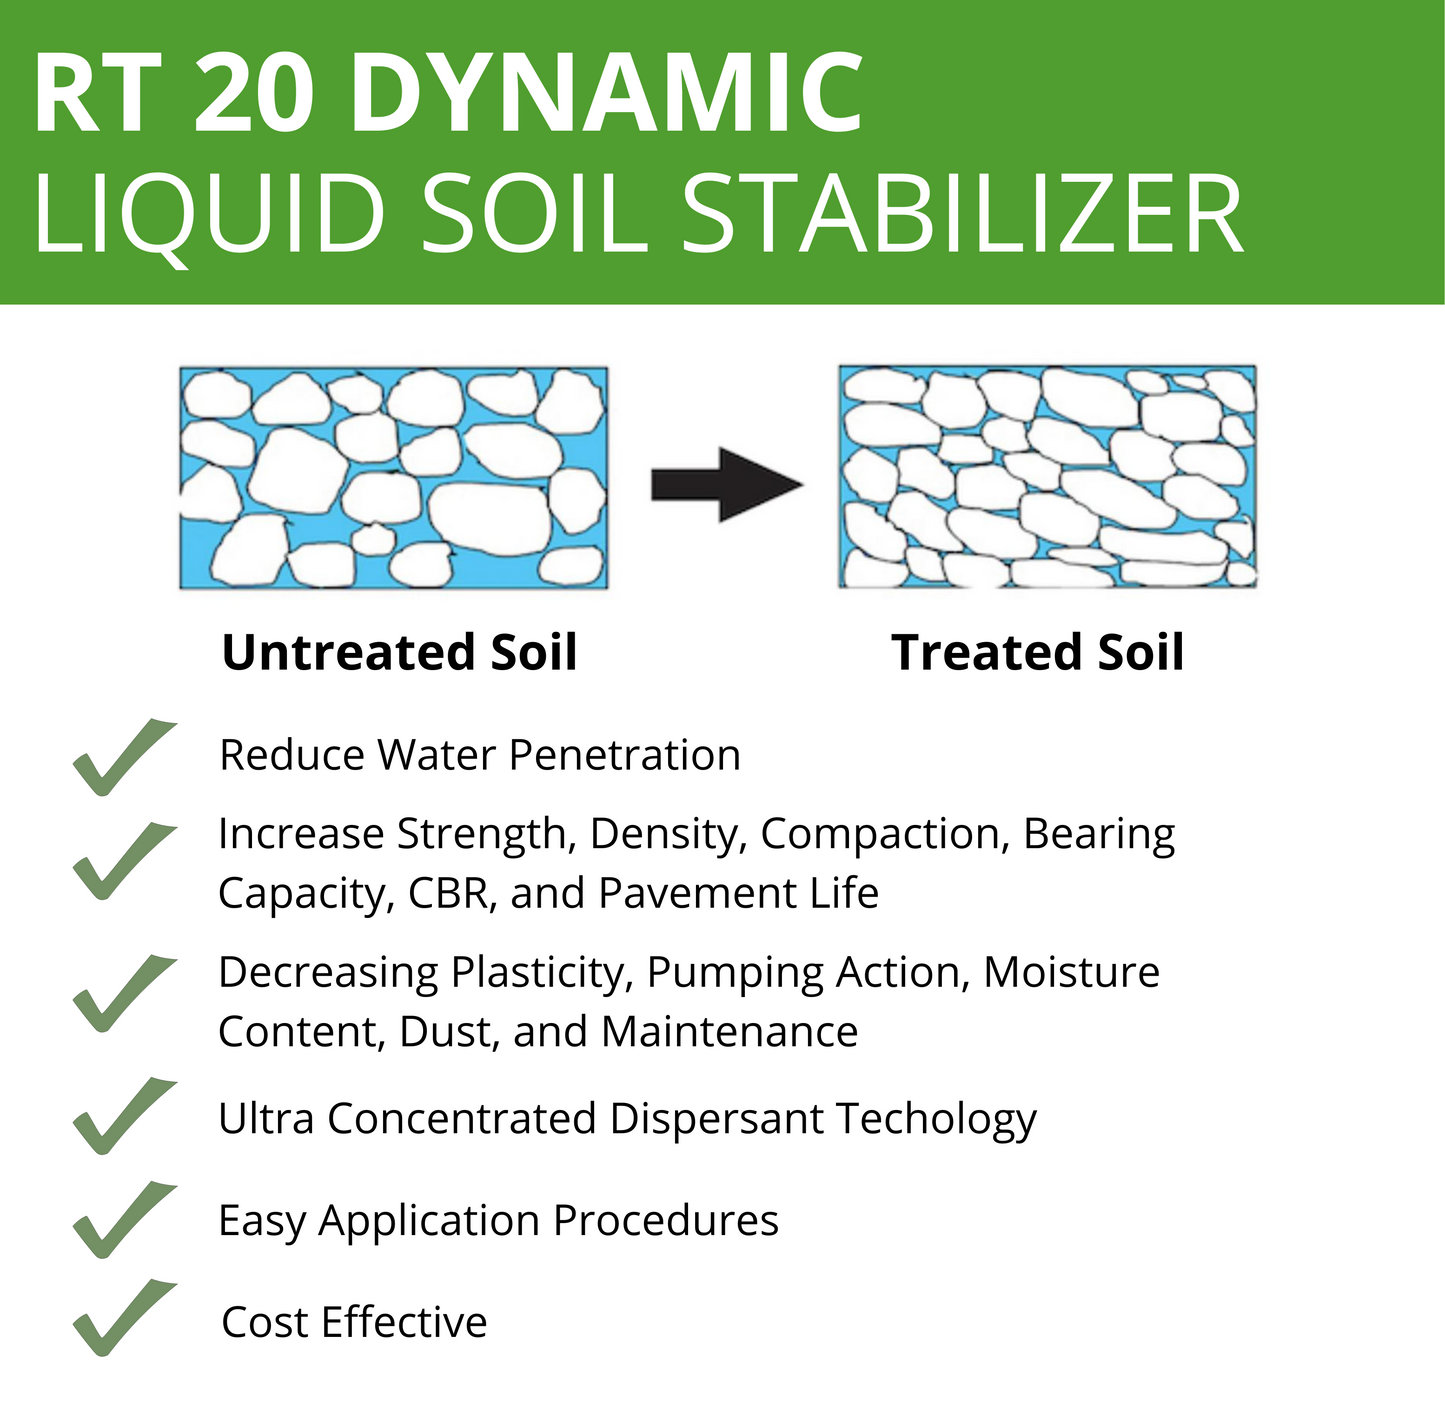 Solve the root cause of dusty mine roads with soil stabilizer by reducing water penetrattion.